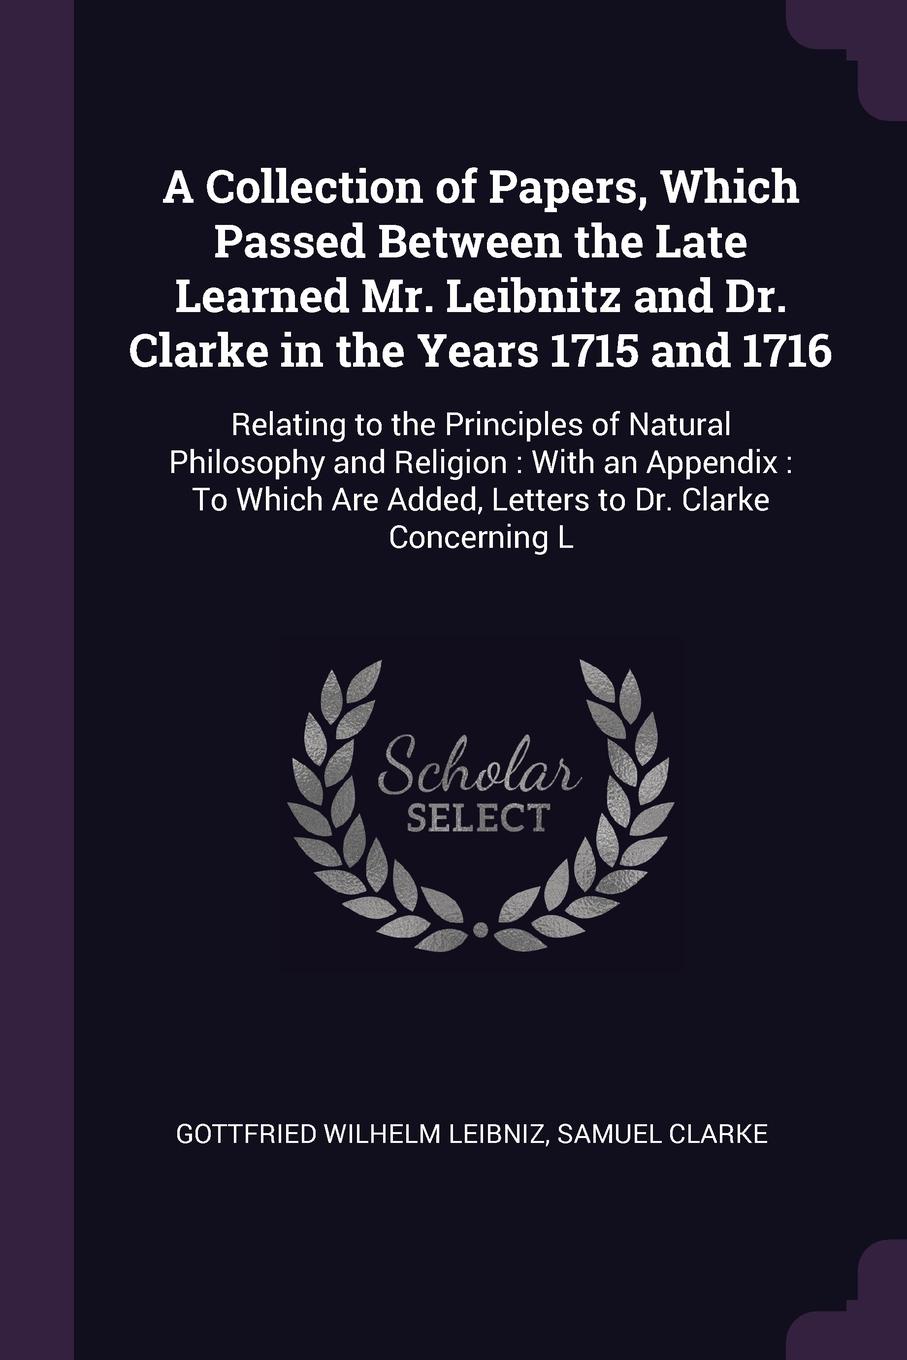 A Collection of Papers, Which Passed Between the Late Learned Mr. Leibnitz and Dr. Clarke in the Years 1715 and 1716. Relating to the Principles of Natural Philosophy and Religion : With an Appendix : To Which Are Added, Letters to Dr. Clarke Conc...